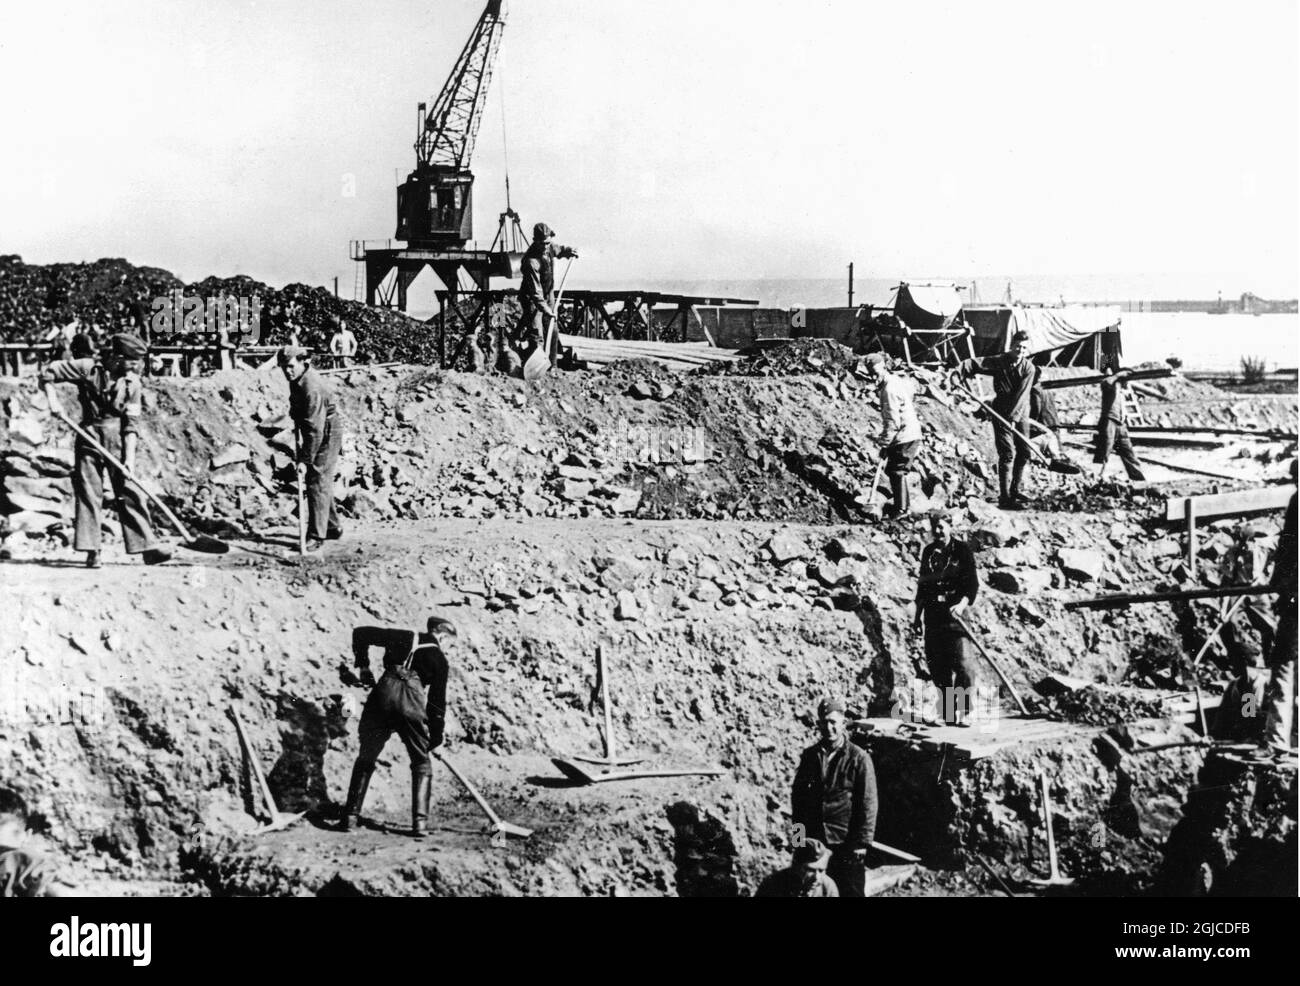 BRITISH CHANNEL, FRANCE 1940-11-22 Beginning of building of fortifications for the Atlantic Wall under the Todt Organisation November 22, 1940, during the German occupation of parts of France during the Second World War. Photo: AB Text & Bilder / Weltbild / SVT / Kod: 5600 Stock Photo